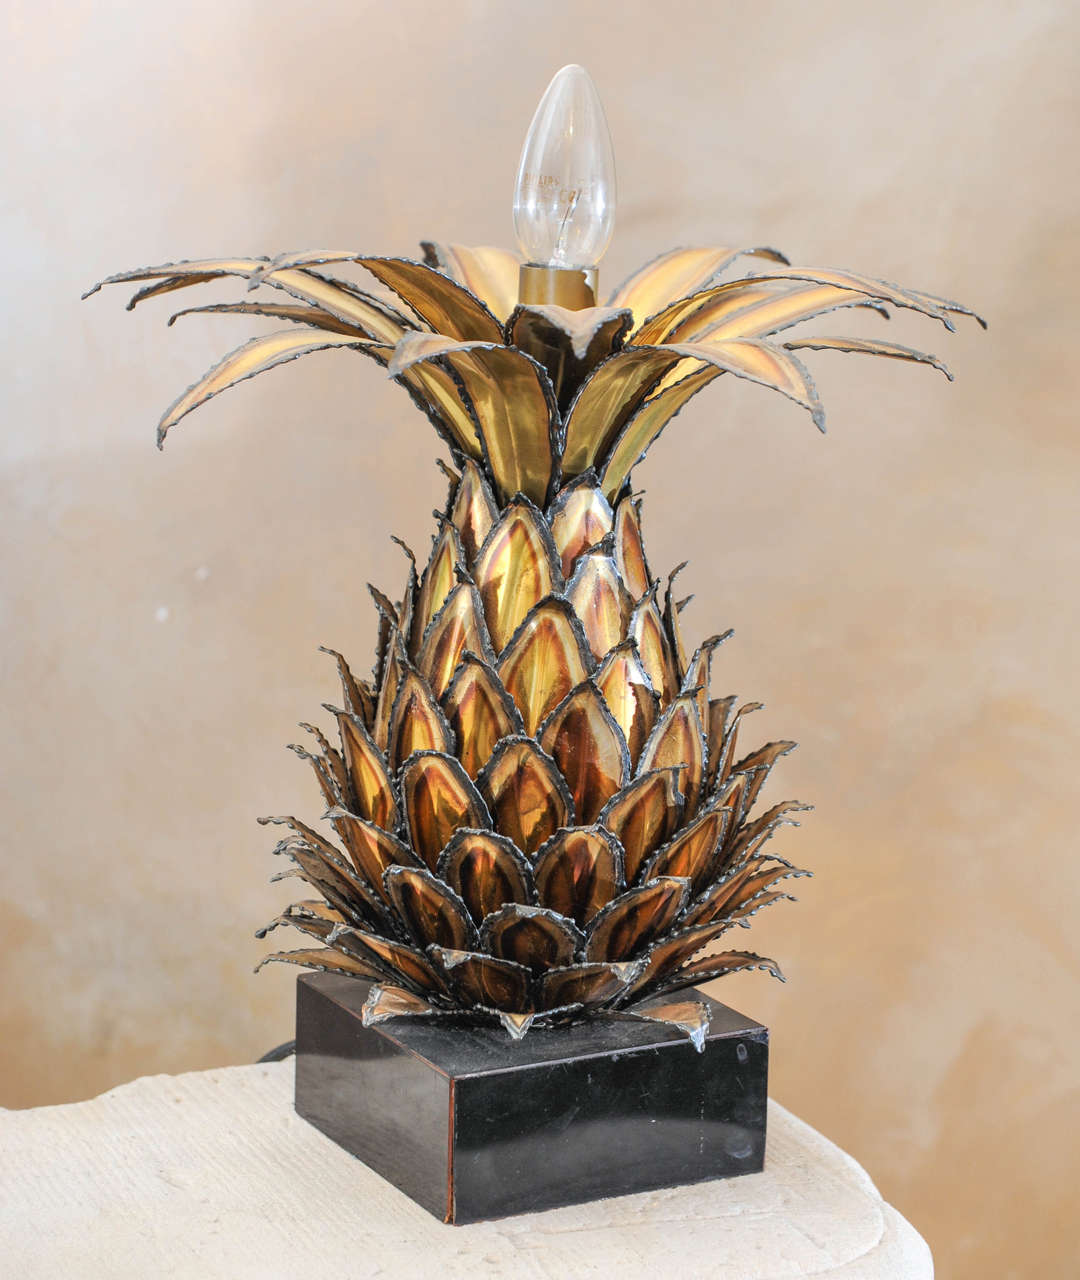 A very decorative 1960s French brass pineapple lamp by Maison Jansen.